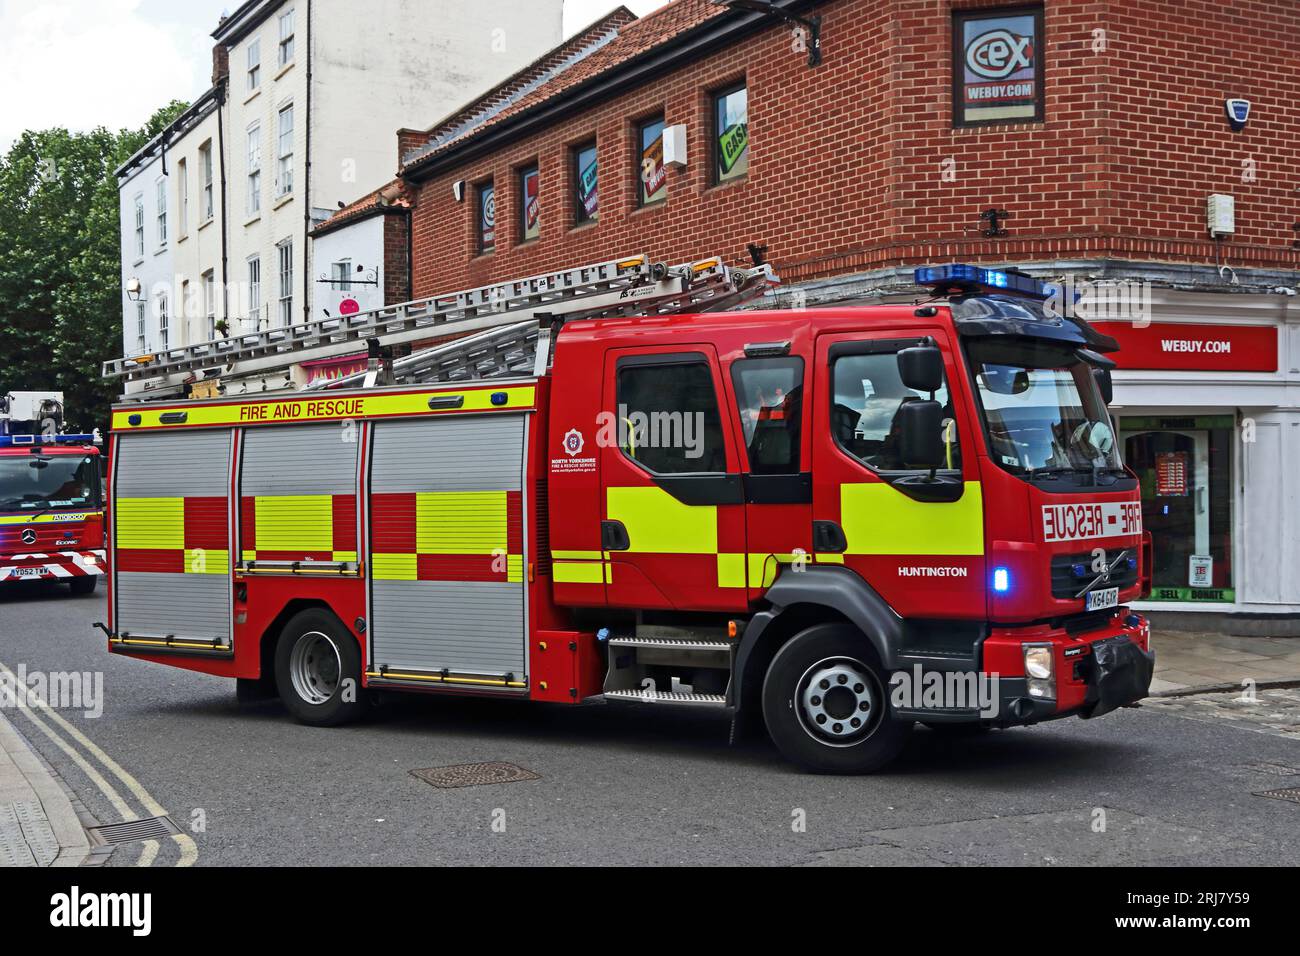 Huntington station Fire Engine attending emergency call out in York Stock Photo